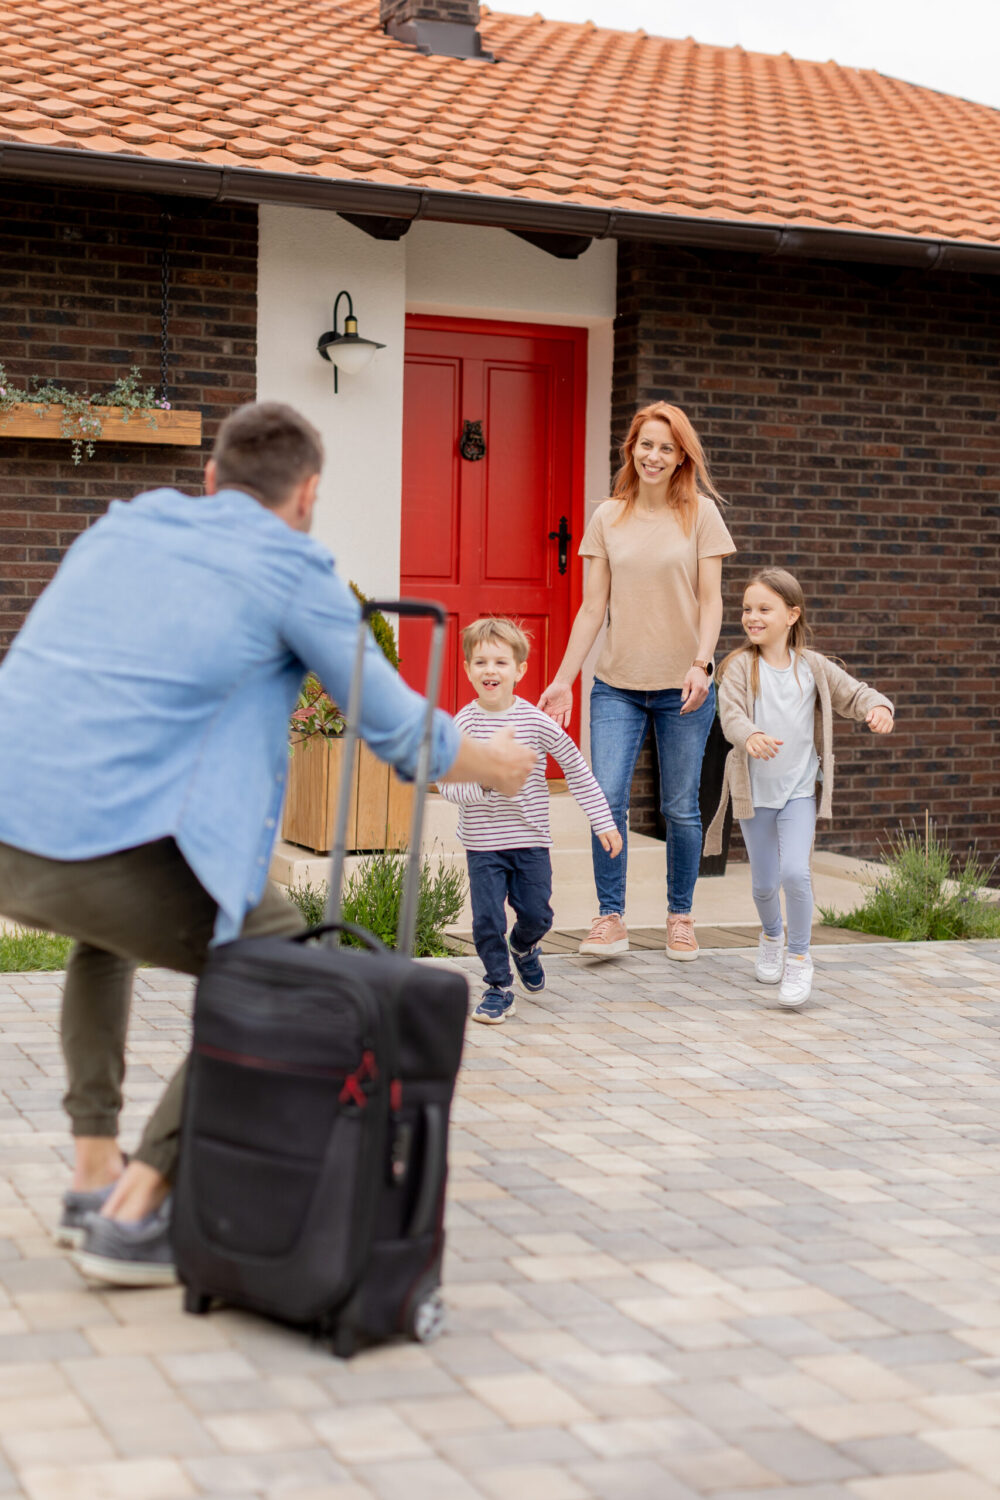 man returning home to family